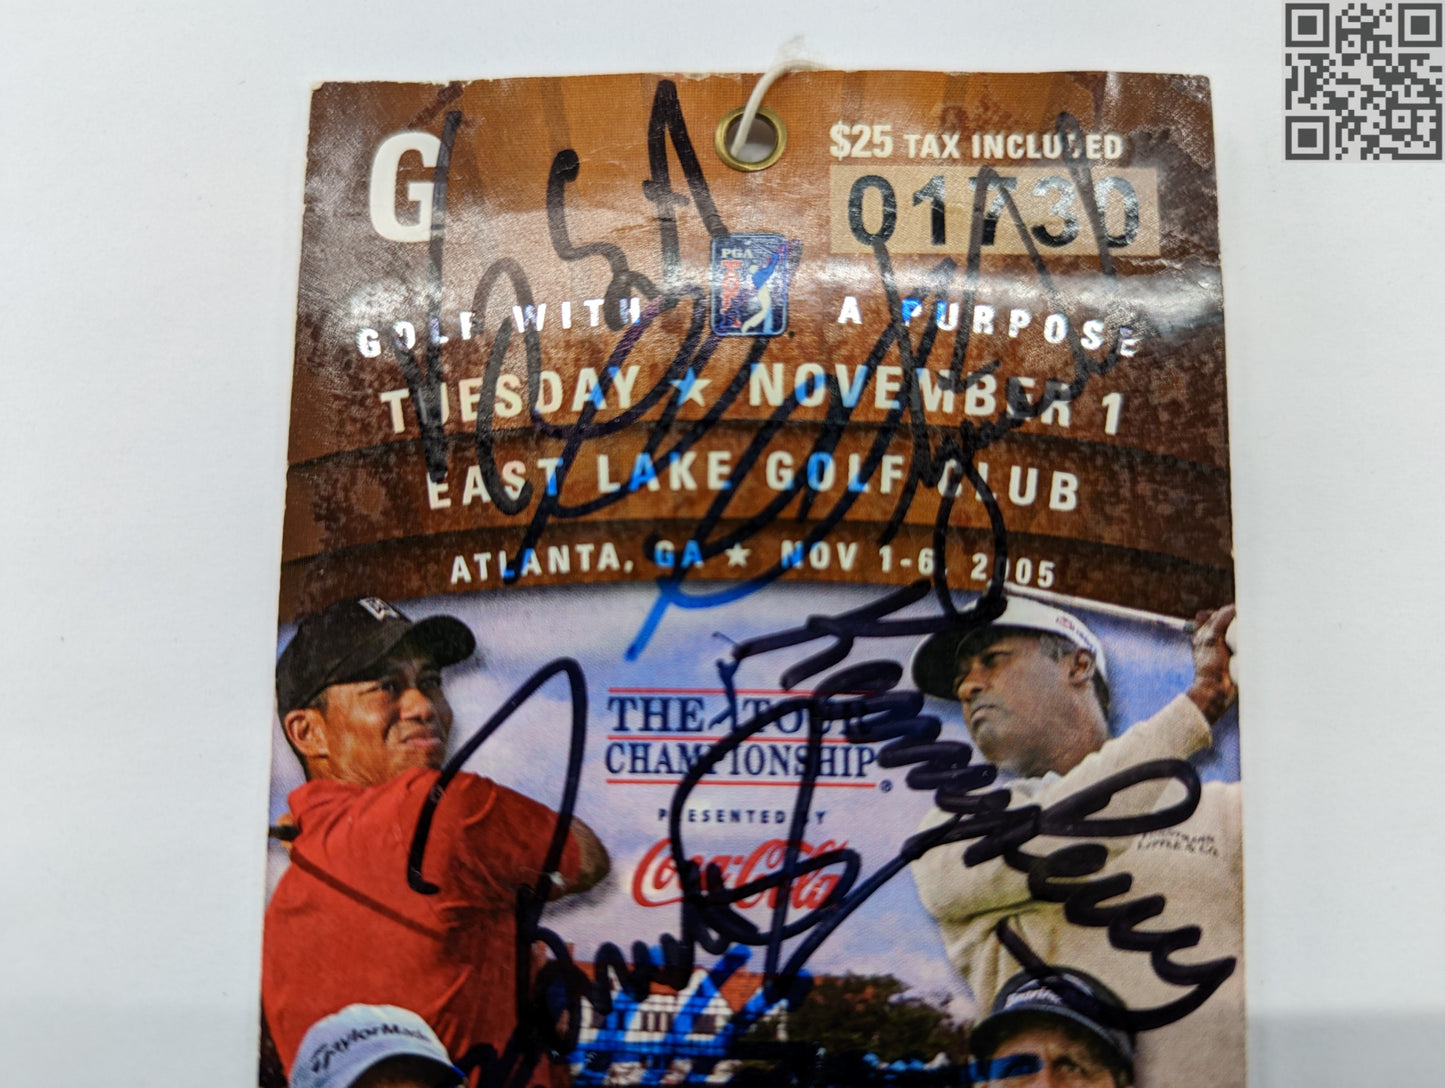 2005 Tiger Woods Signed Ticket The Tour Championship East Lake Golf Club